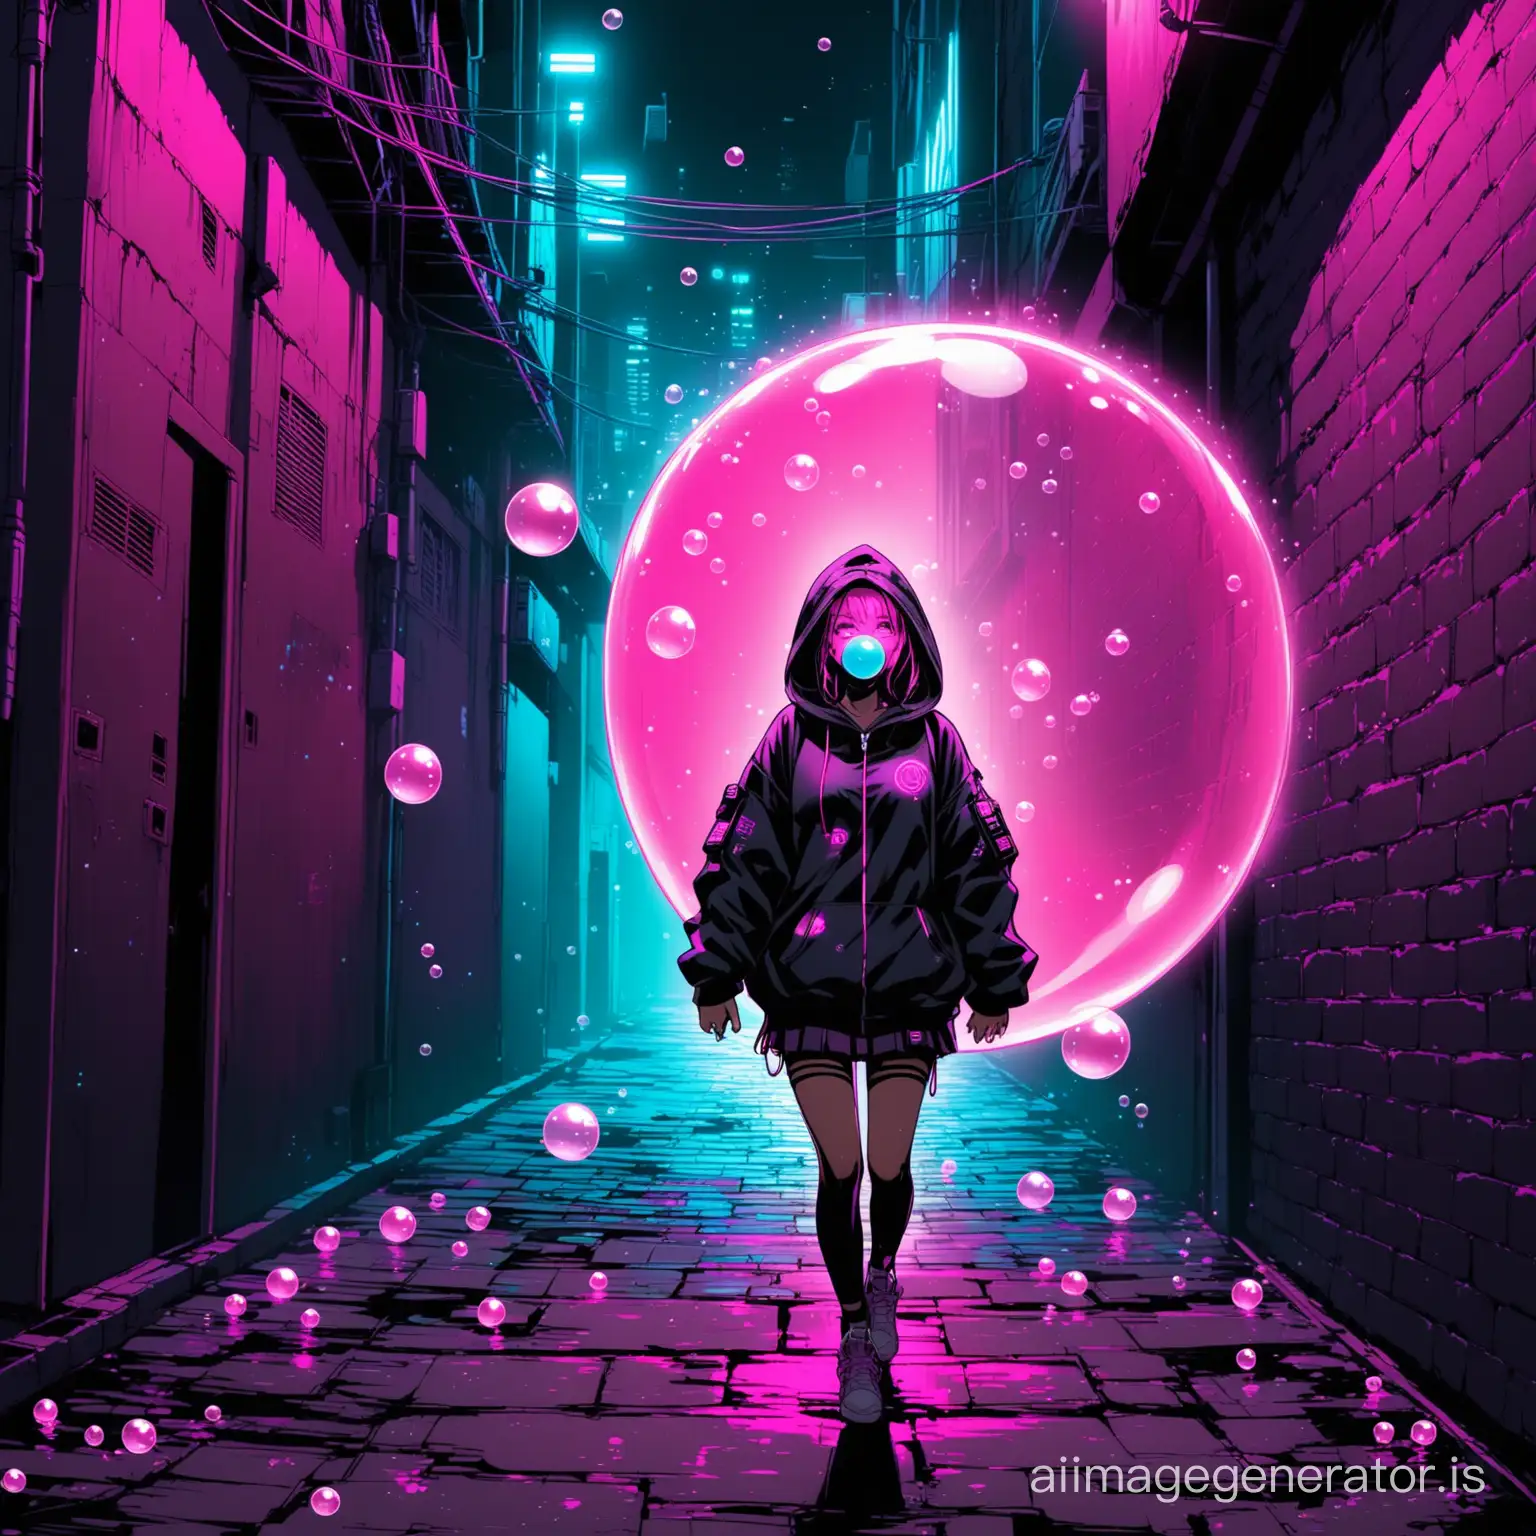 cyberpunk style with neon teme. a girl walking in a dark narrow alley wearing a hoodie and blow up a pink bubble gum and bubbles coming out from her hands and bubbles in the ground